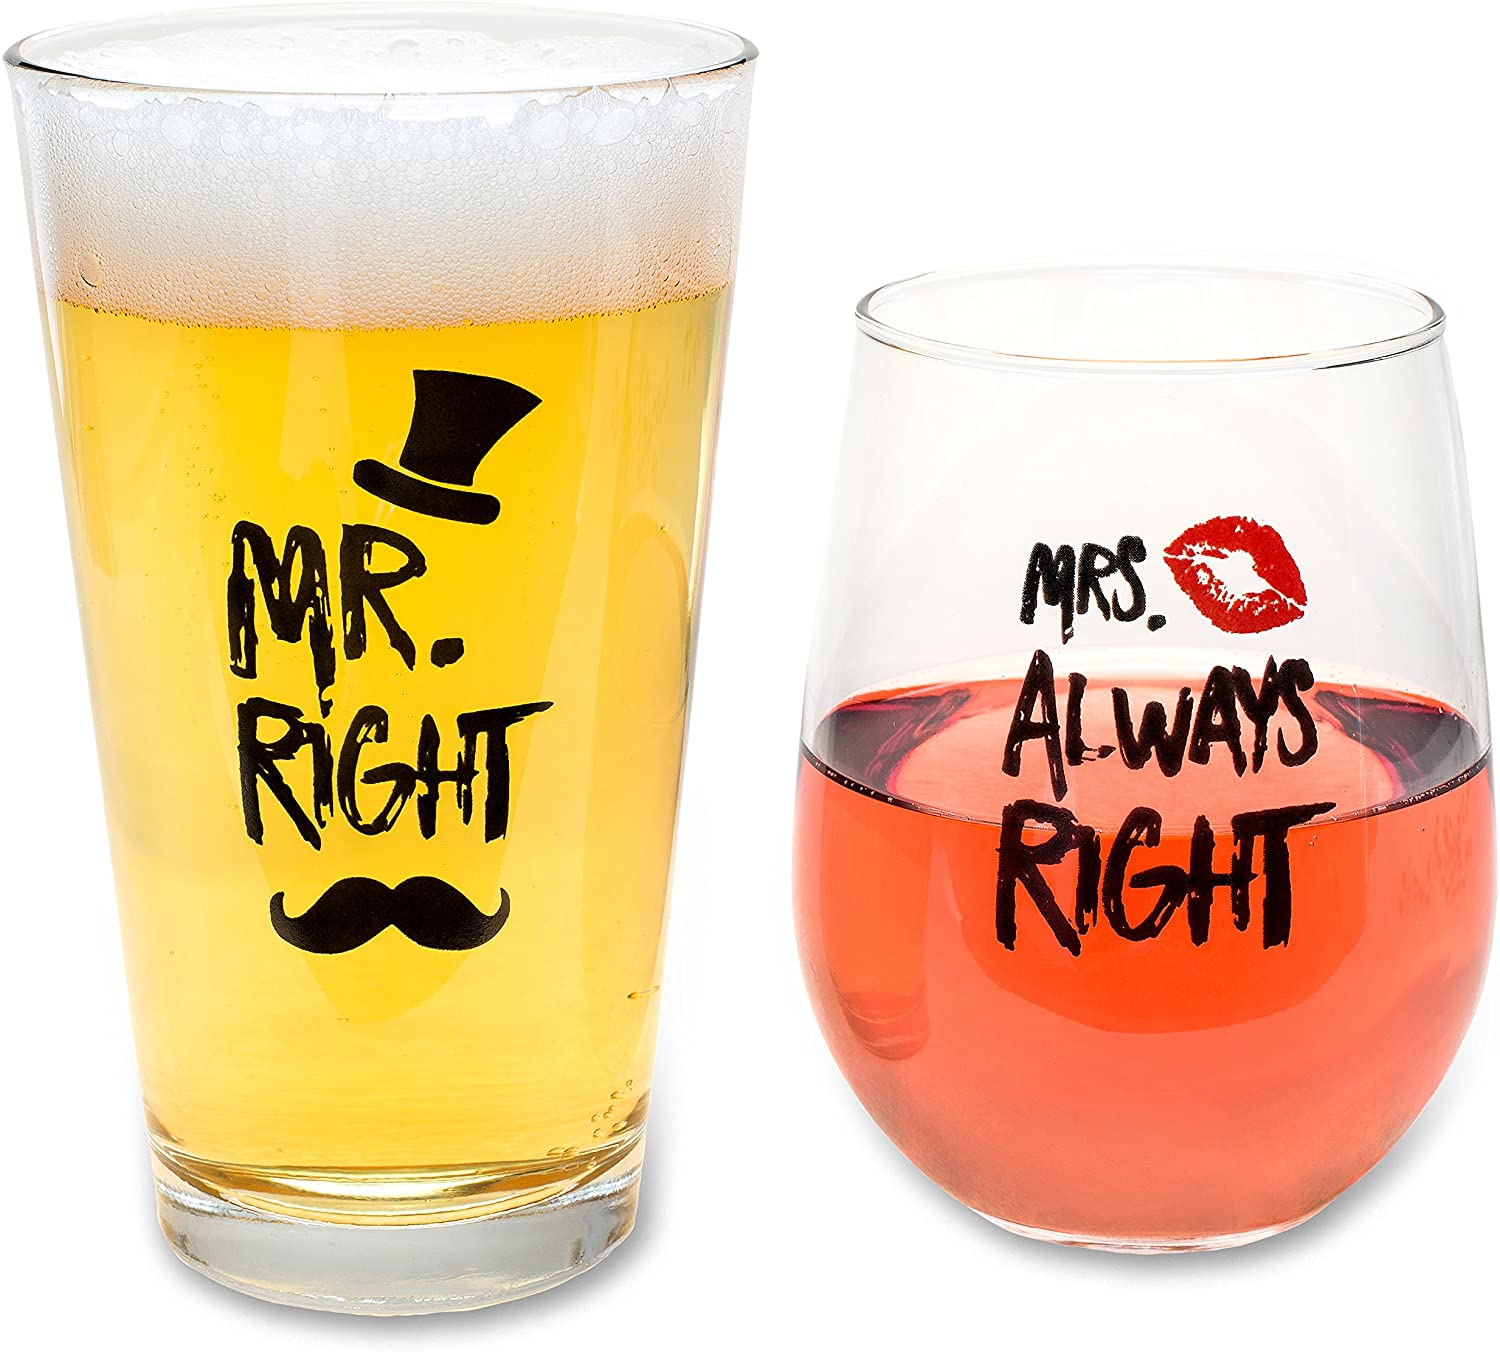 The Plympton Co. His & Hers Funny Beer & Wine Glasses, 2-Pack